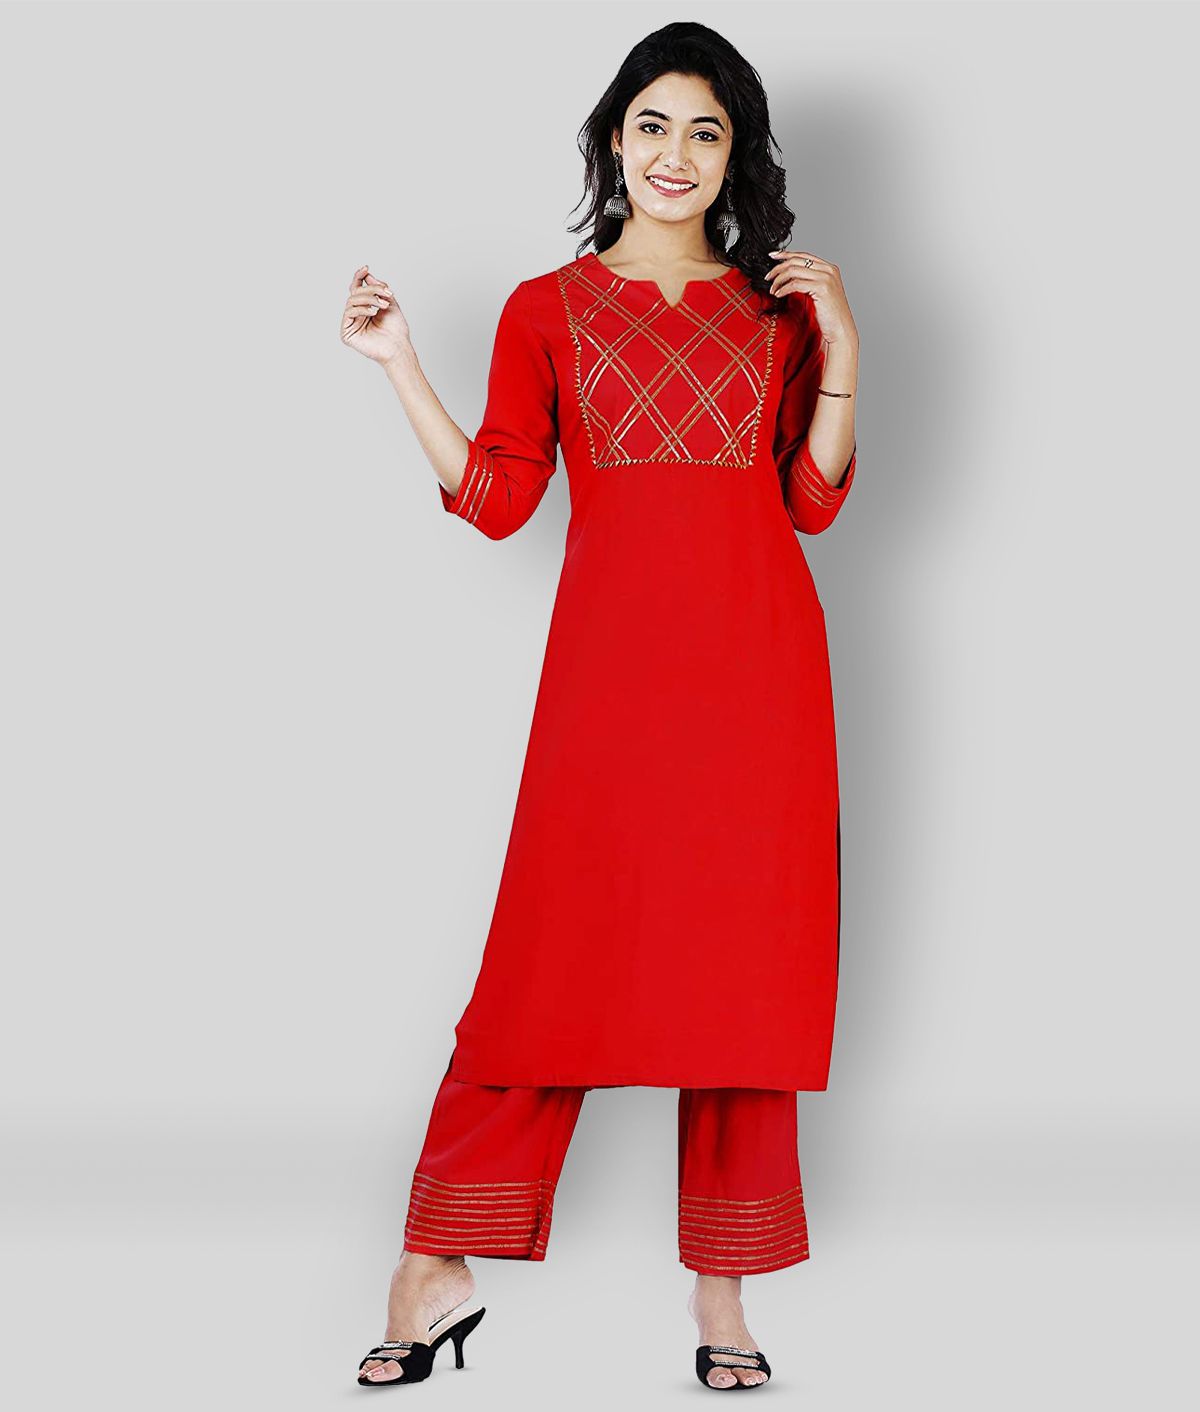     			G4Girl - Red Straight Rayon Women's Stitched Salwar Suit ( Pack of 1 )